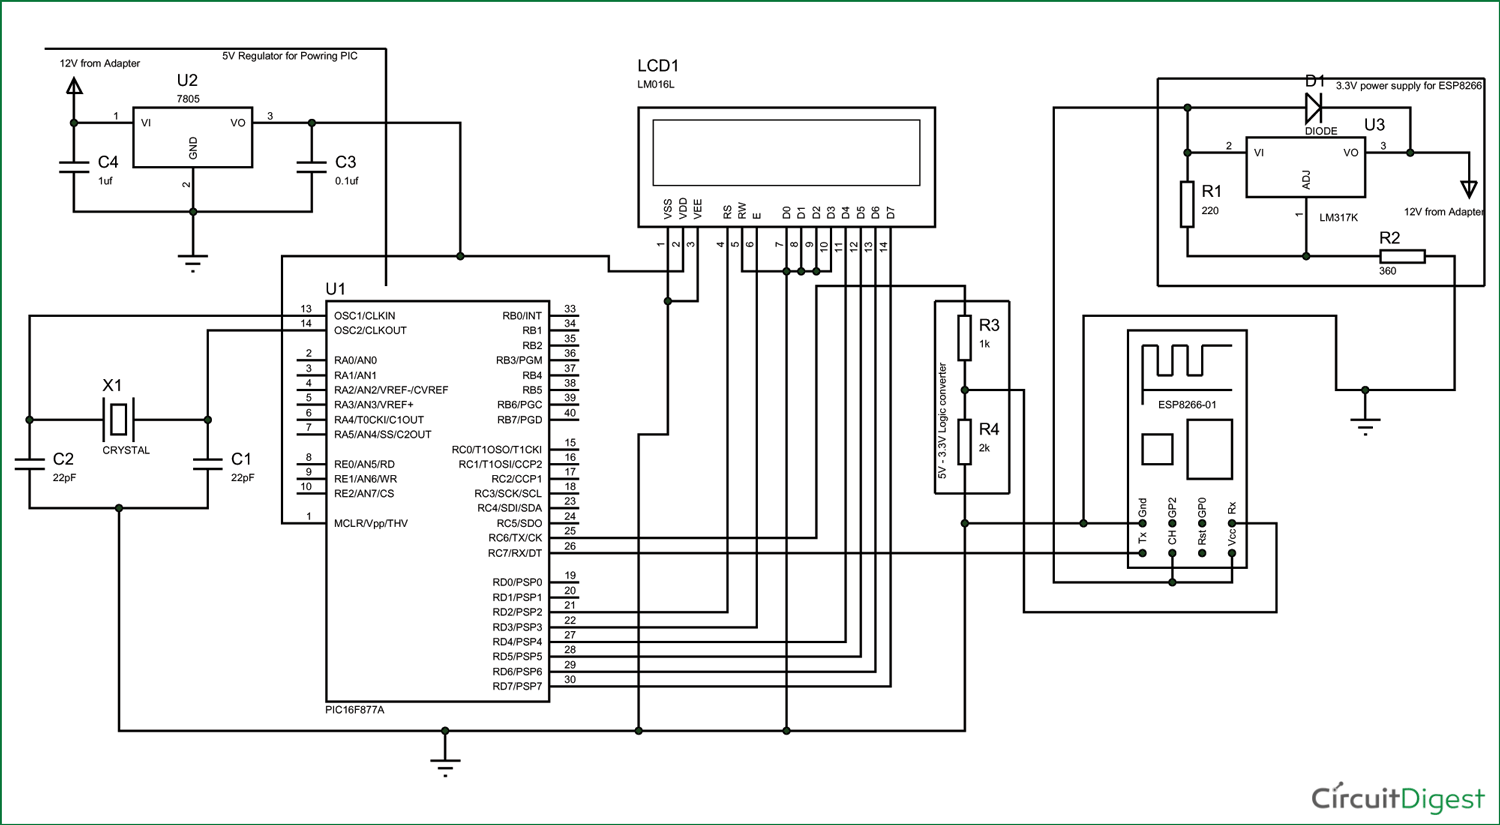 Circuit Diagram for Interfacing PIC16F877A with ESP8266